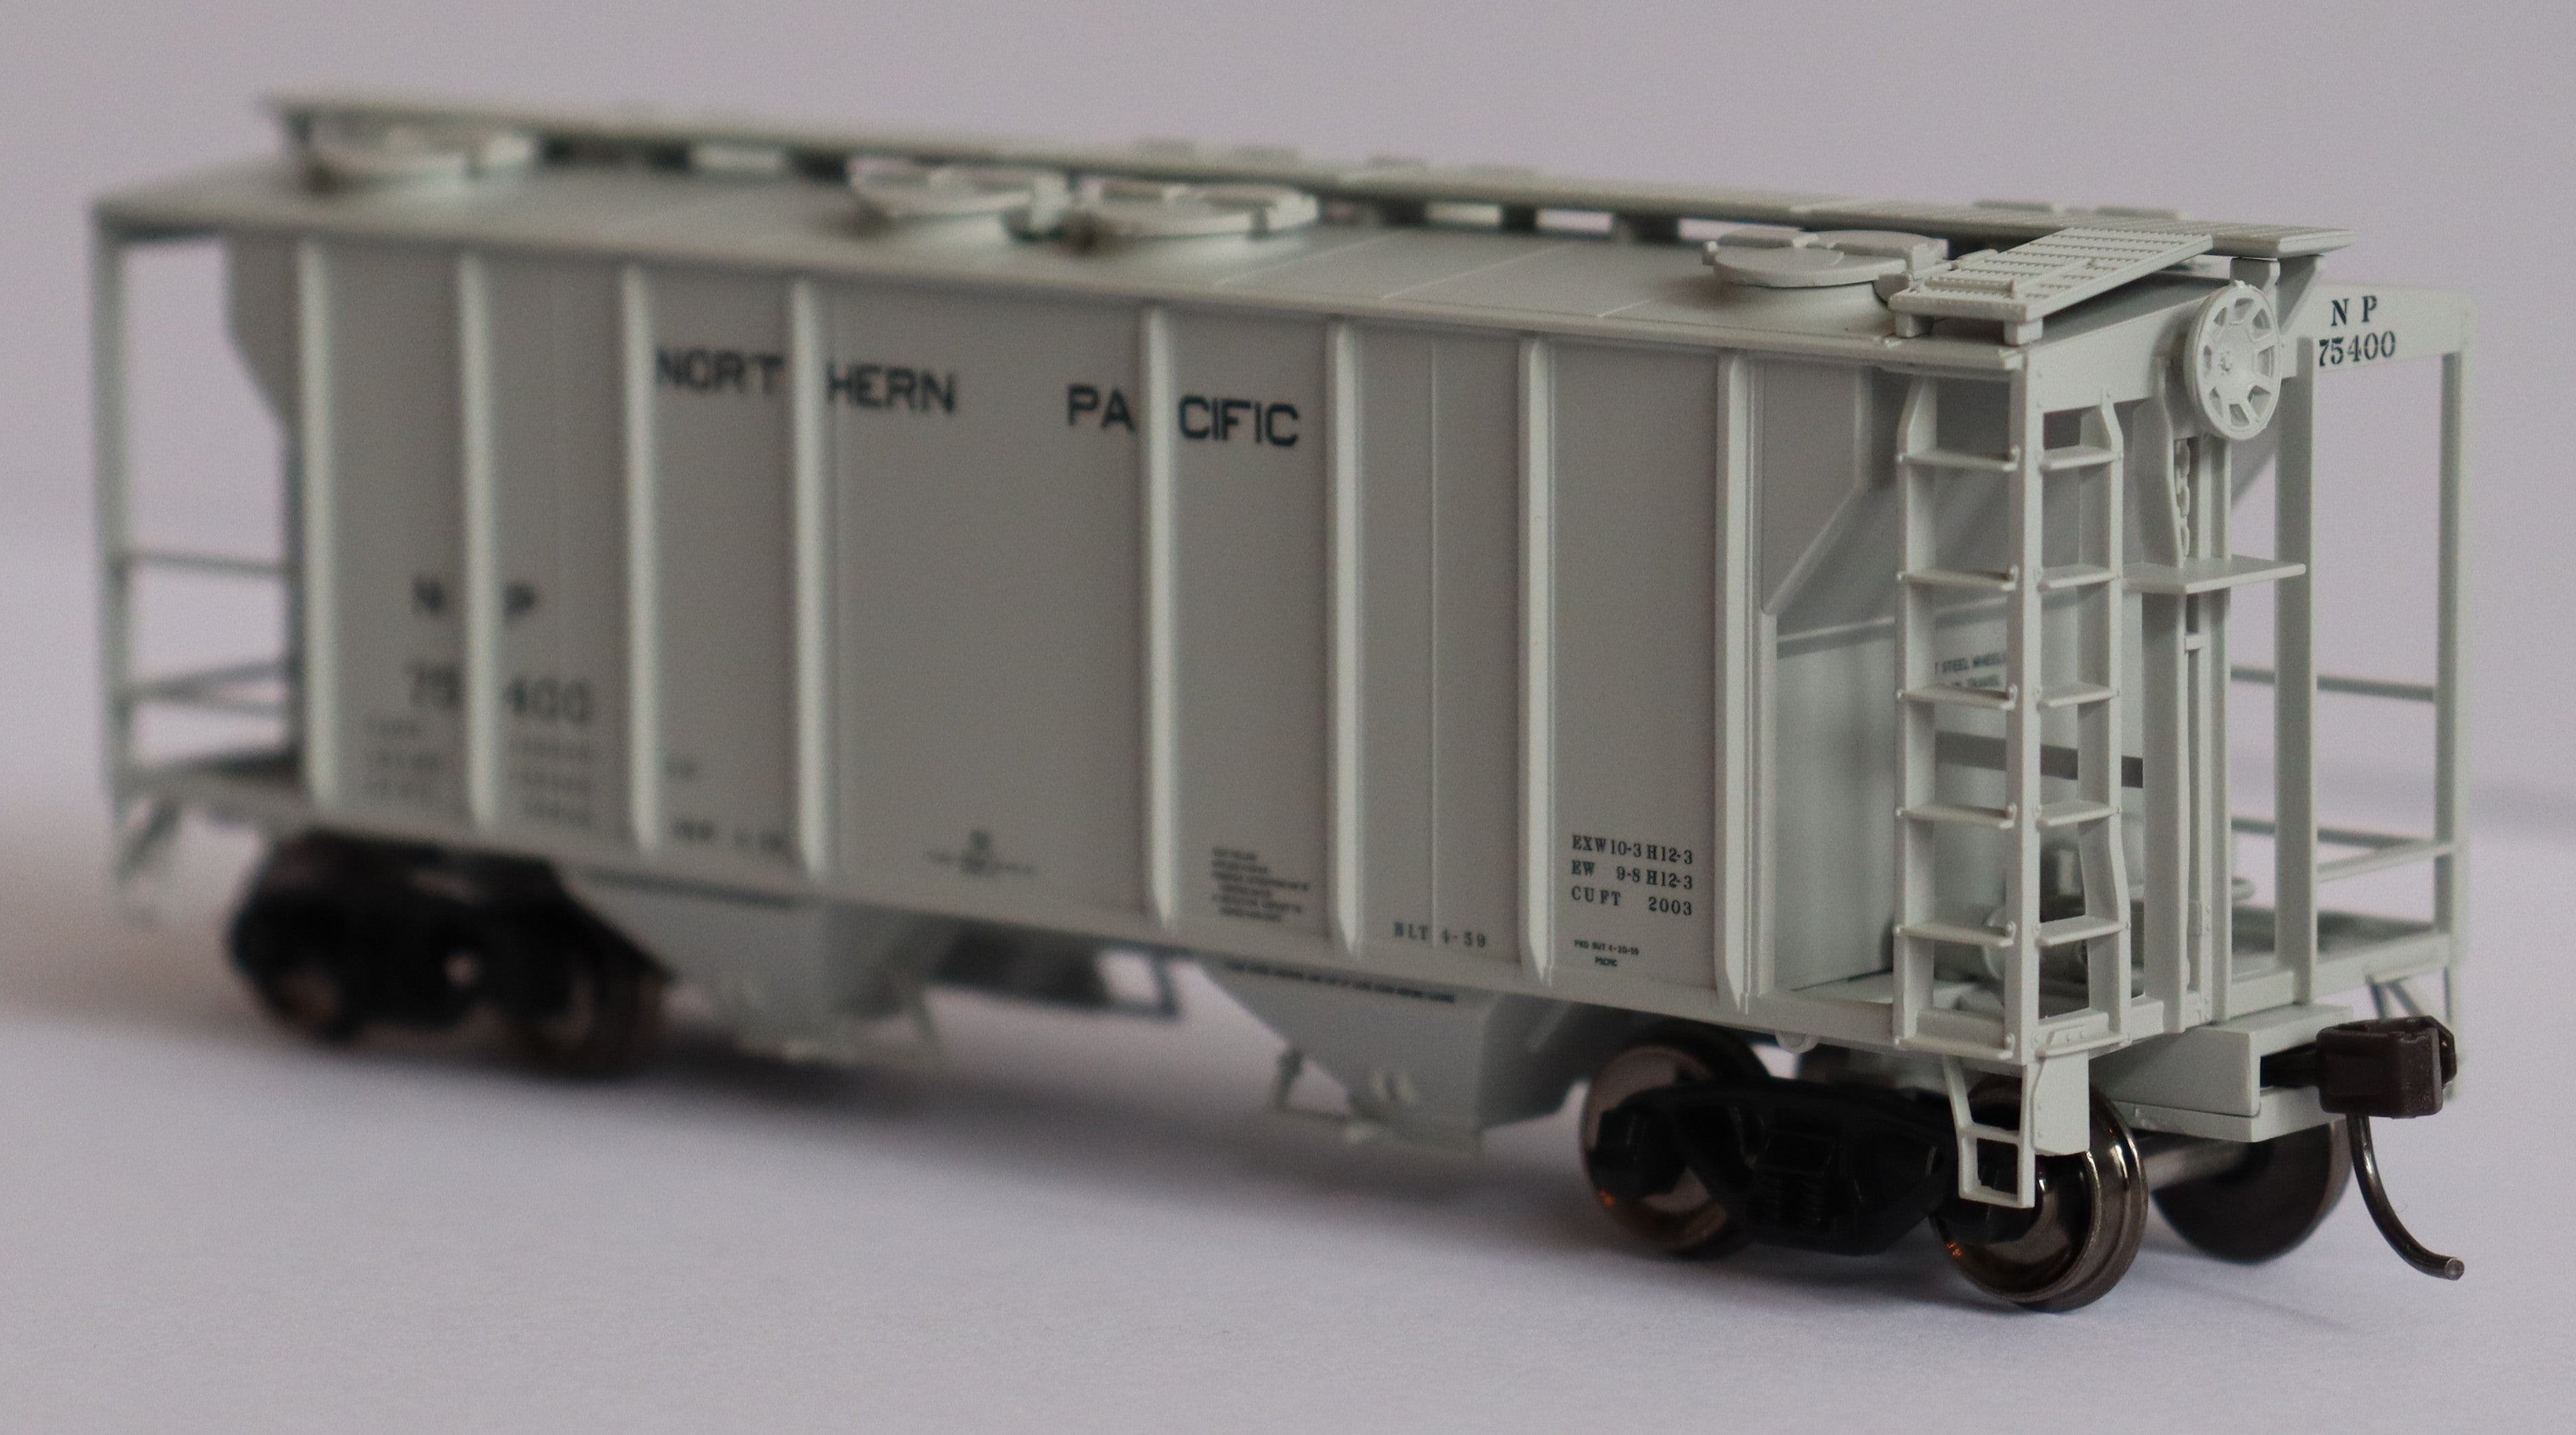 Atlas AHO-20006566 HO TM PS-2 COVERED HOPPER NORTHERN PACIFIC #75446